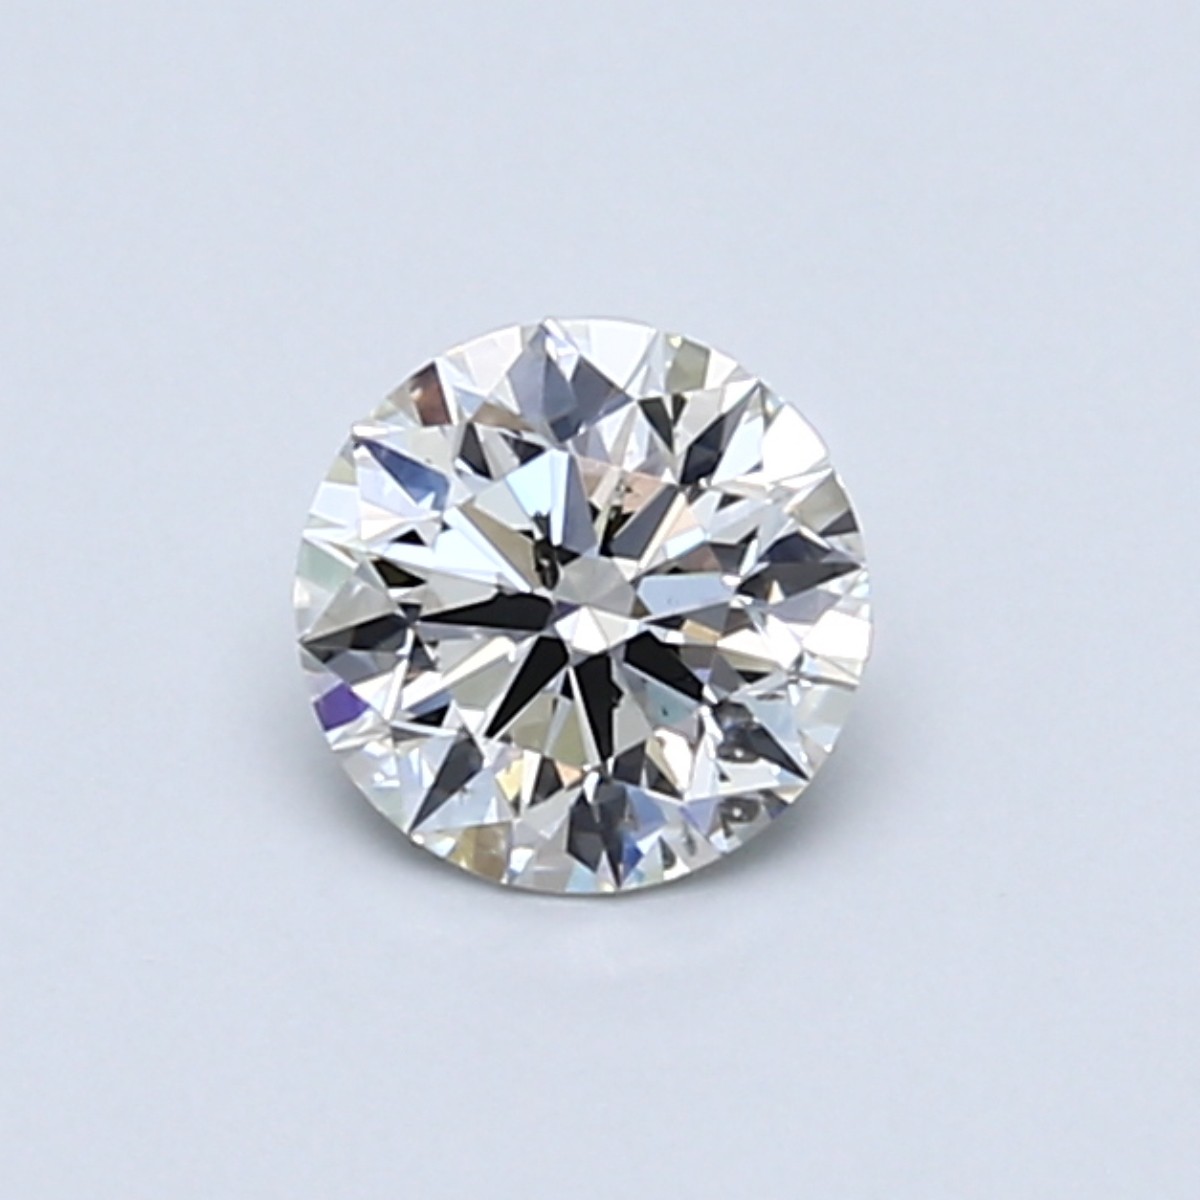 Round 0.56 Carat H Color SI2 Clarity For Sale